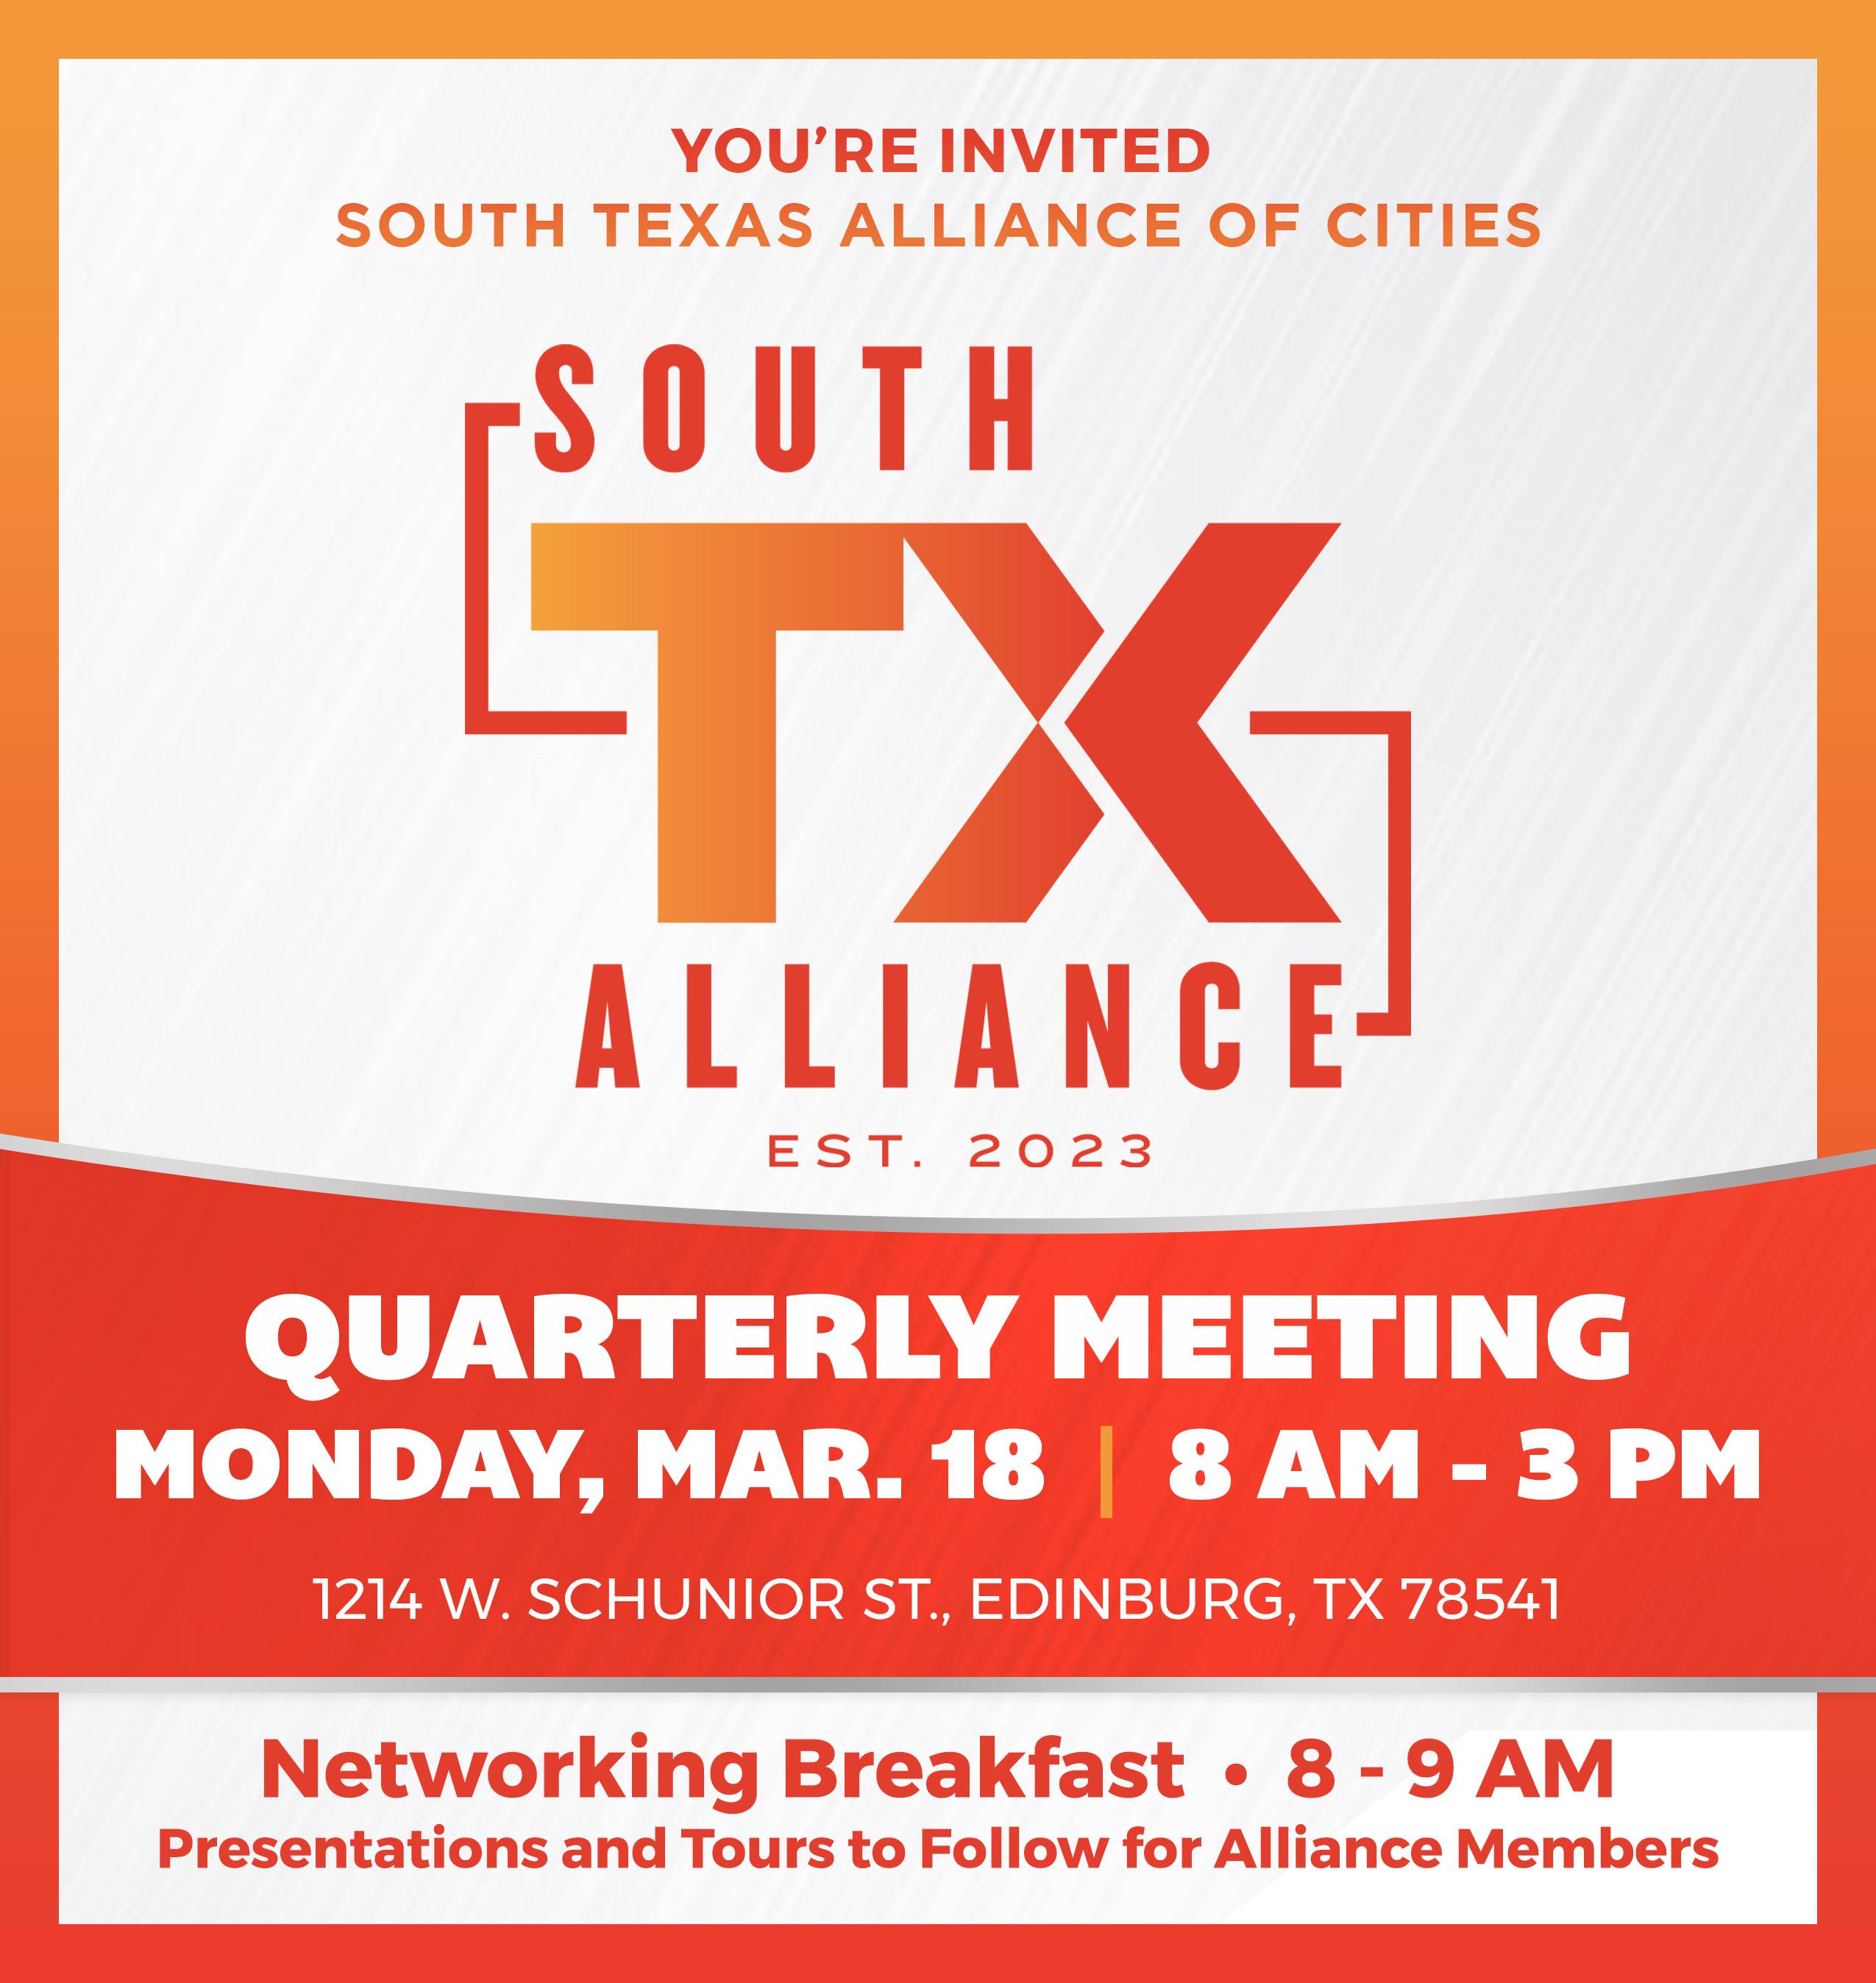 South-Texas-Alliance-of-Cities-Quarterly-Meeting - Copy